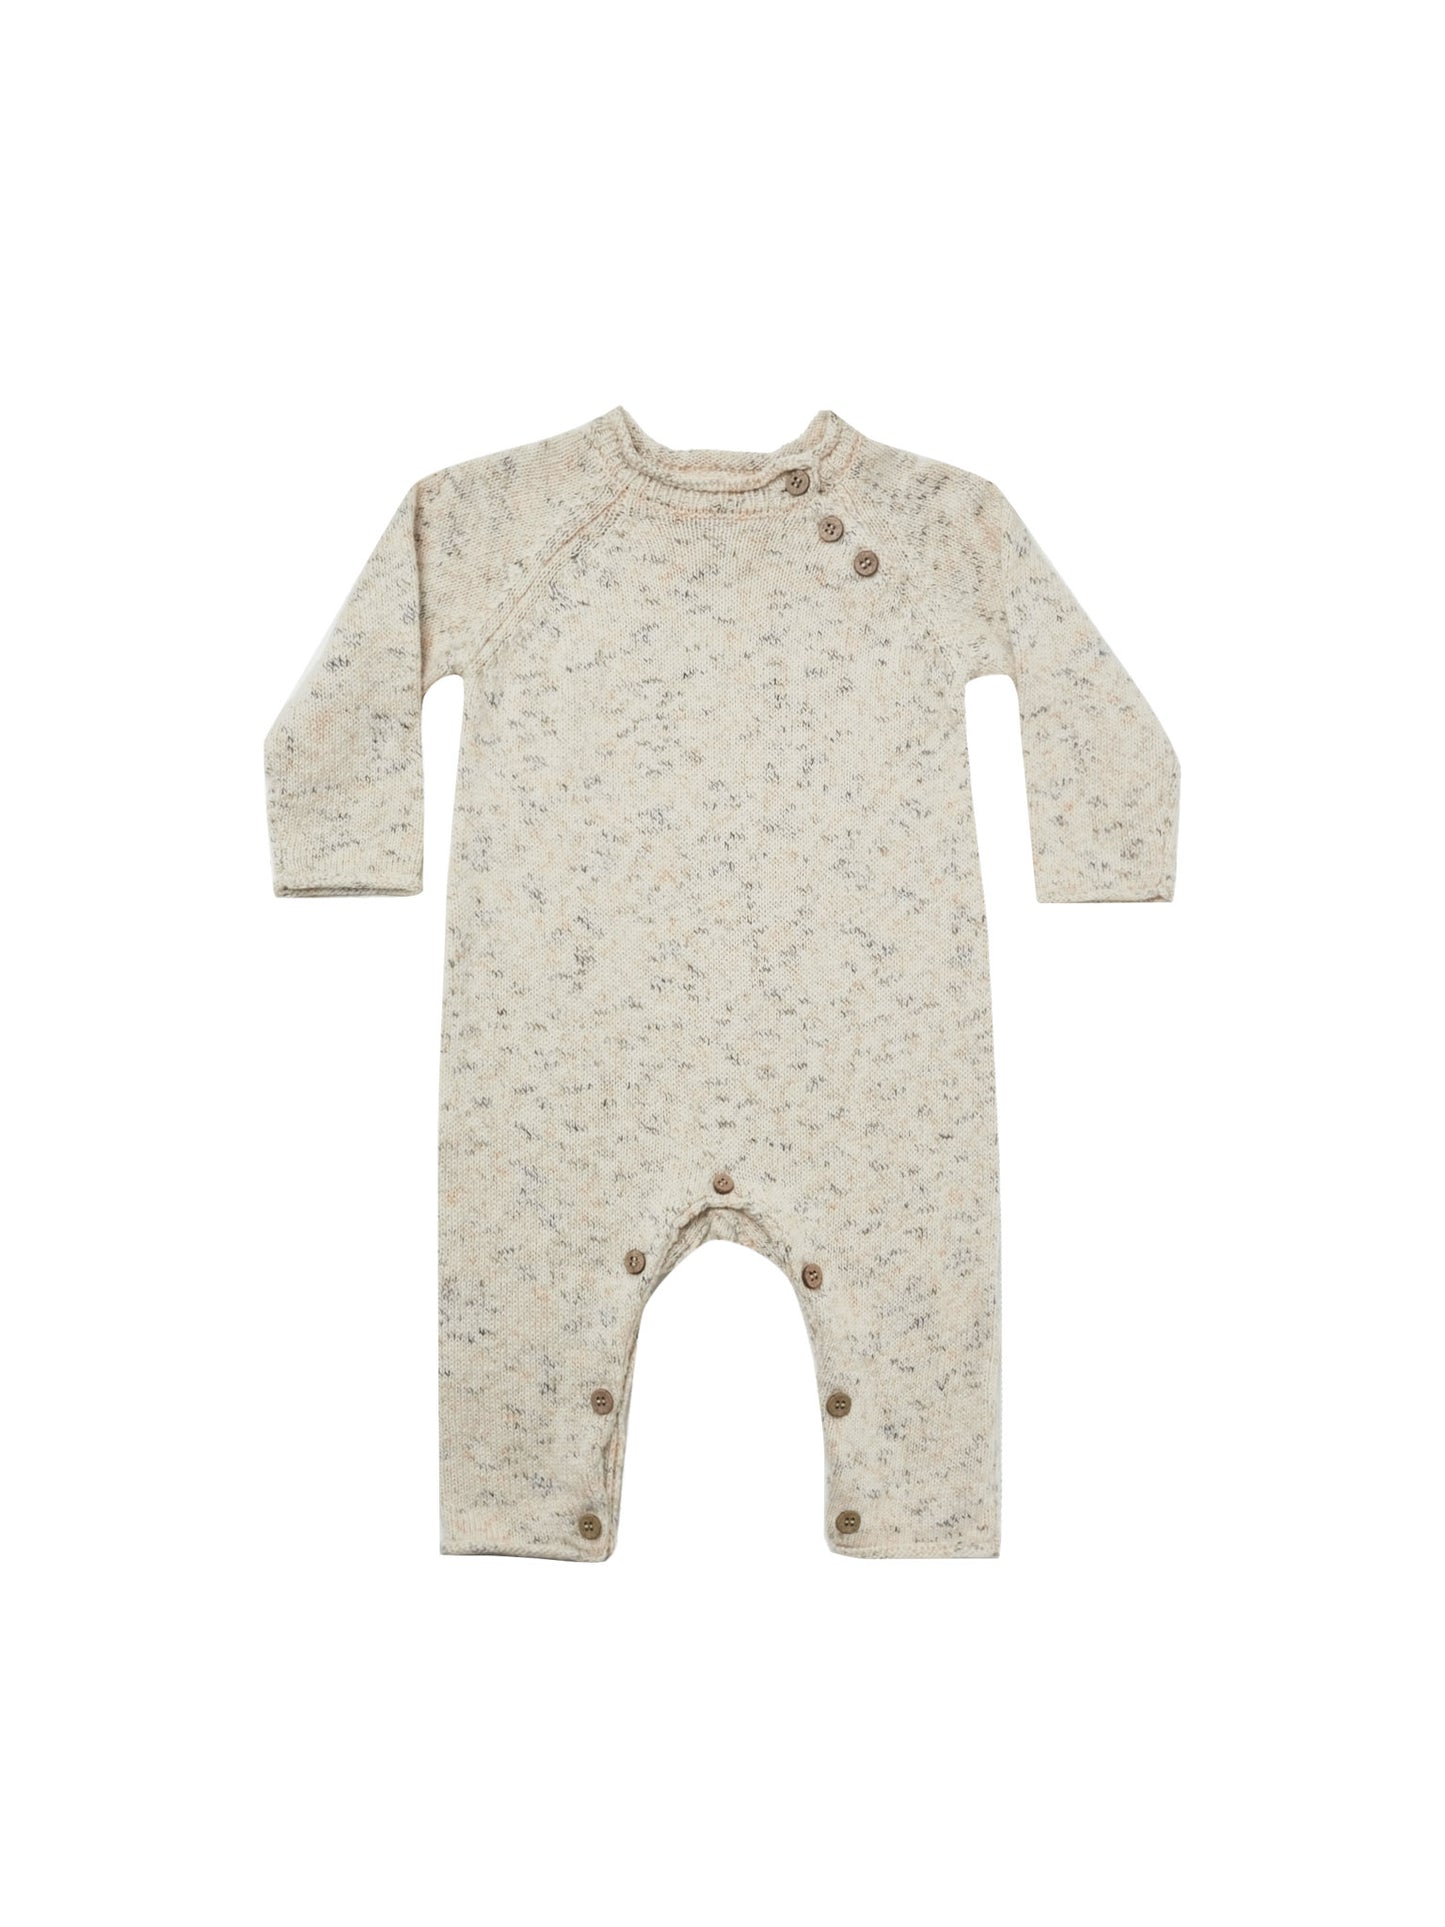 Quincy Mae - Speckled Knit Jumpsuit - Natural- LAST ONE 12-18 MO